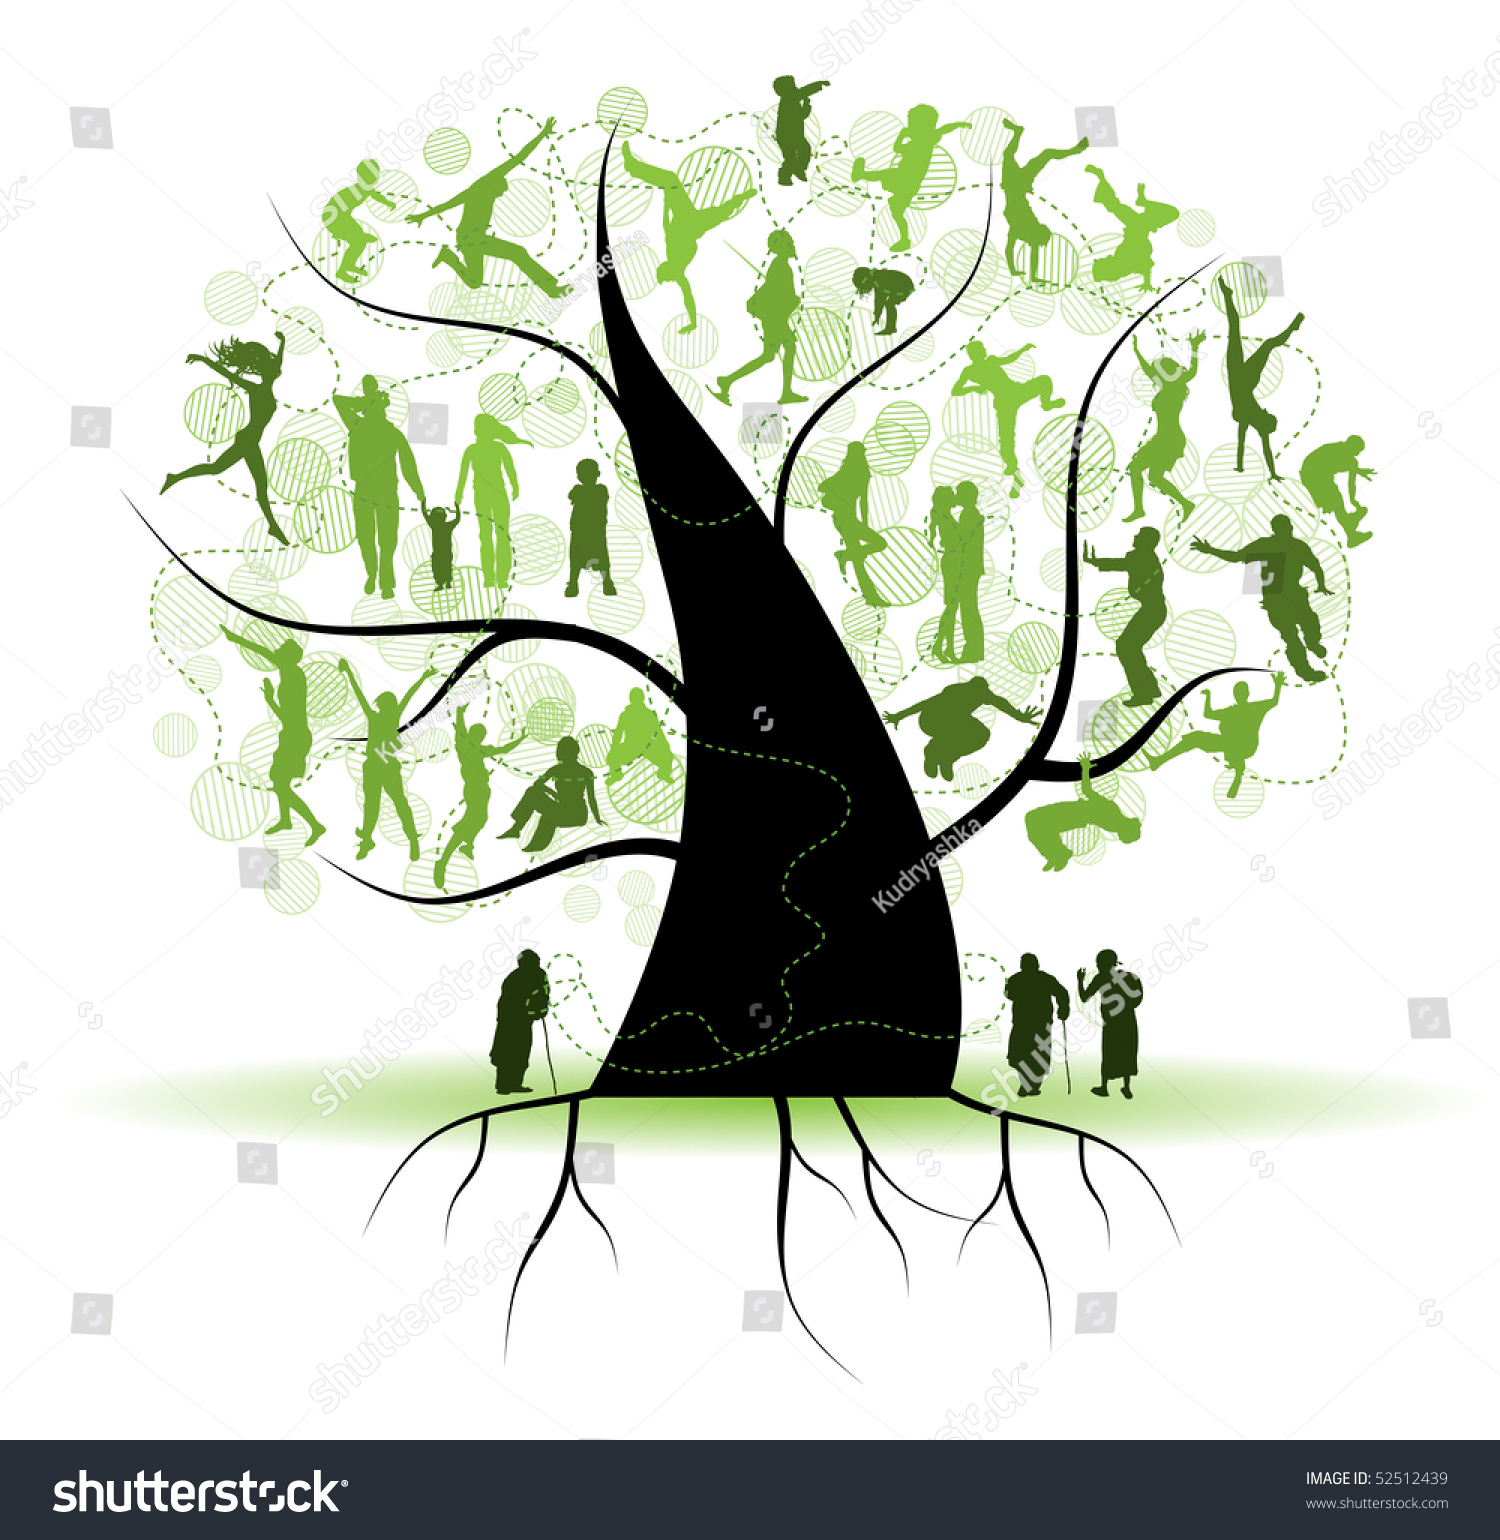 Family Tree Relatives People Silhouettes Stock Vector 52512439 ...